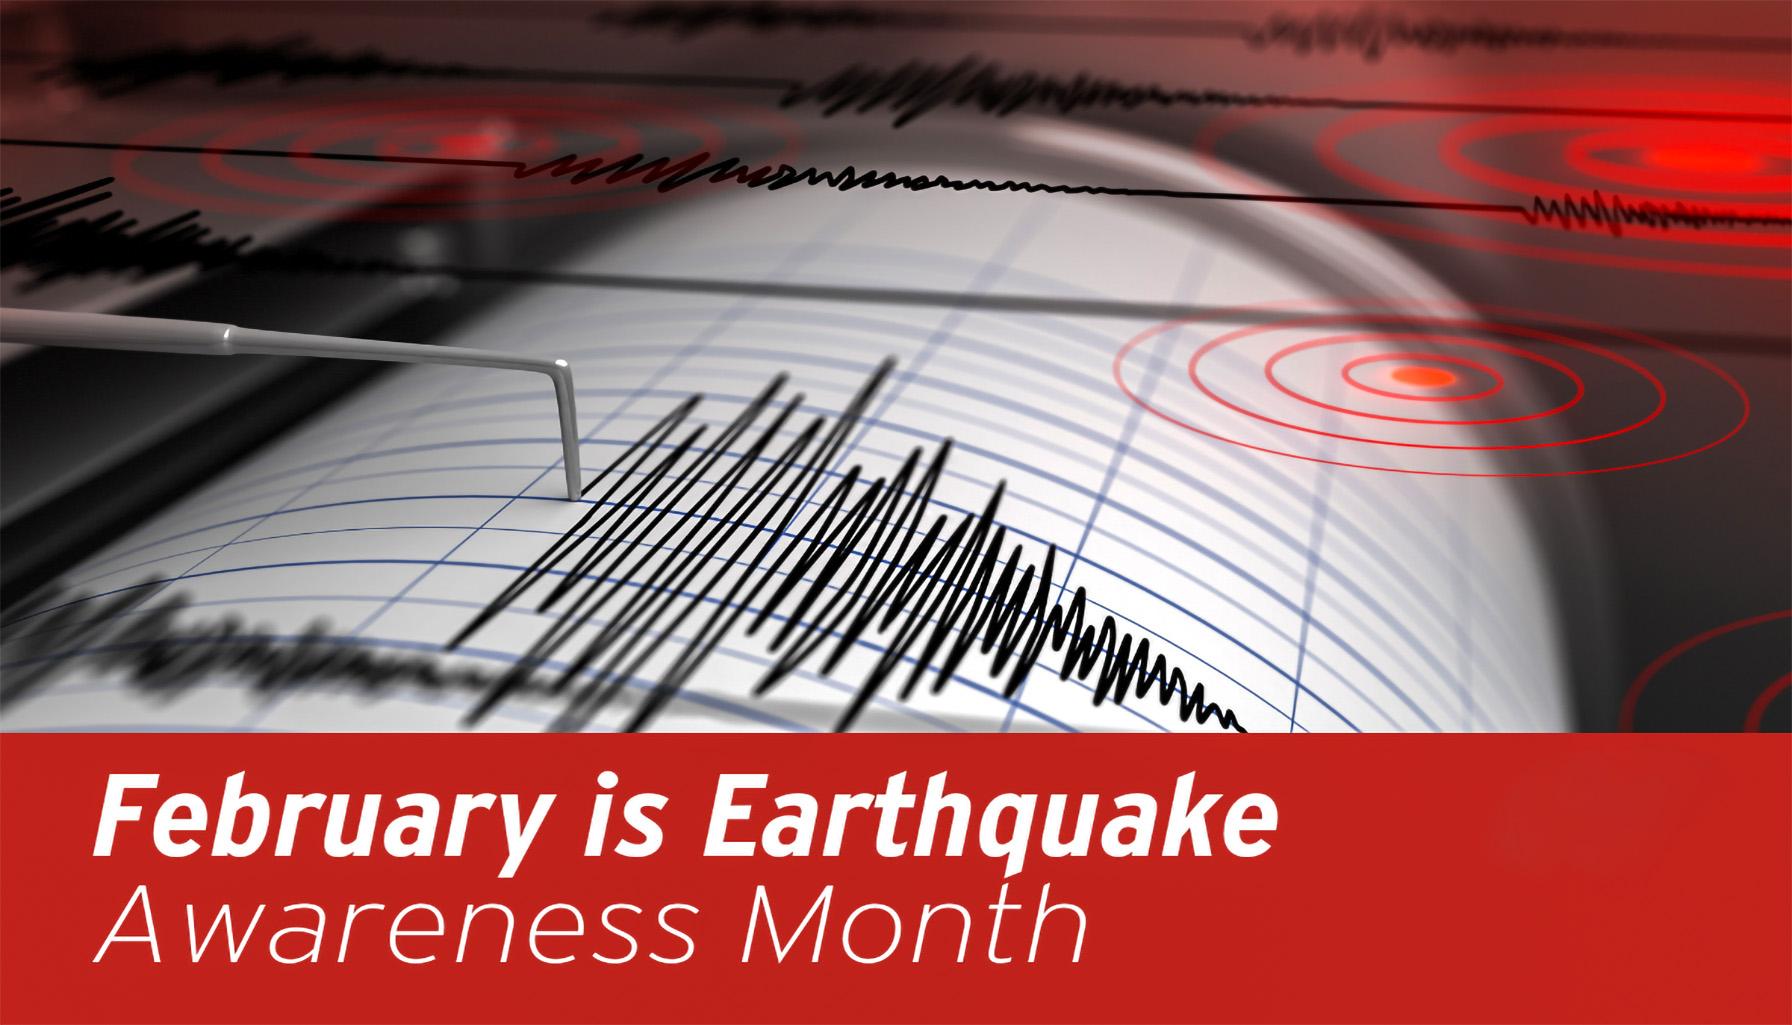 Earthquake Aareness Month news graphic